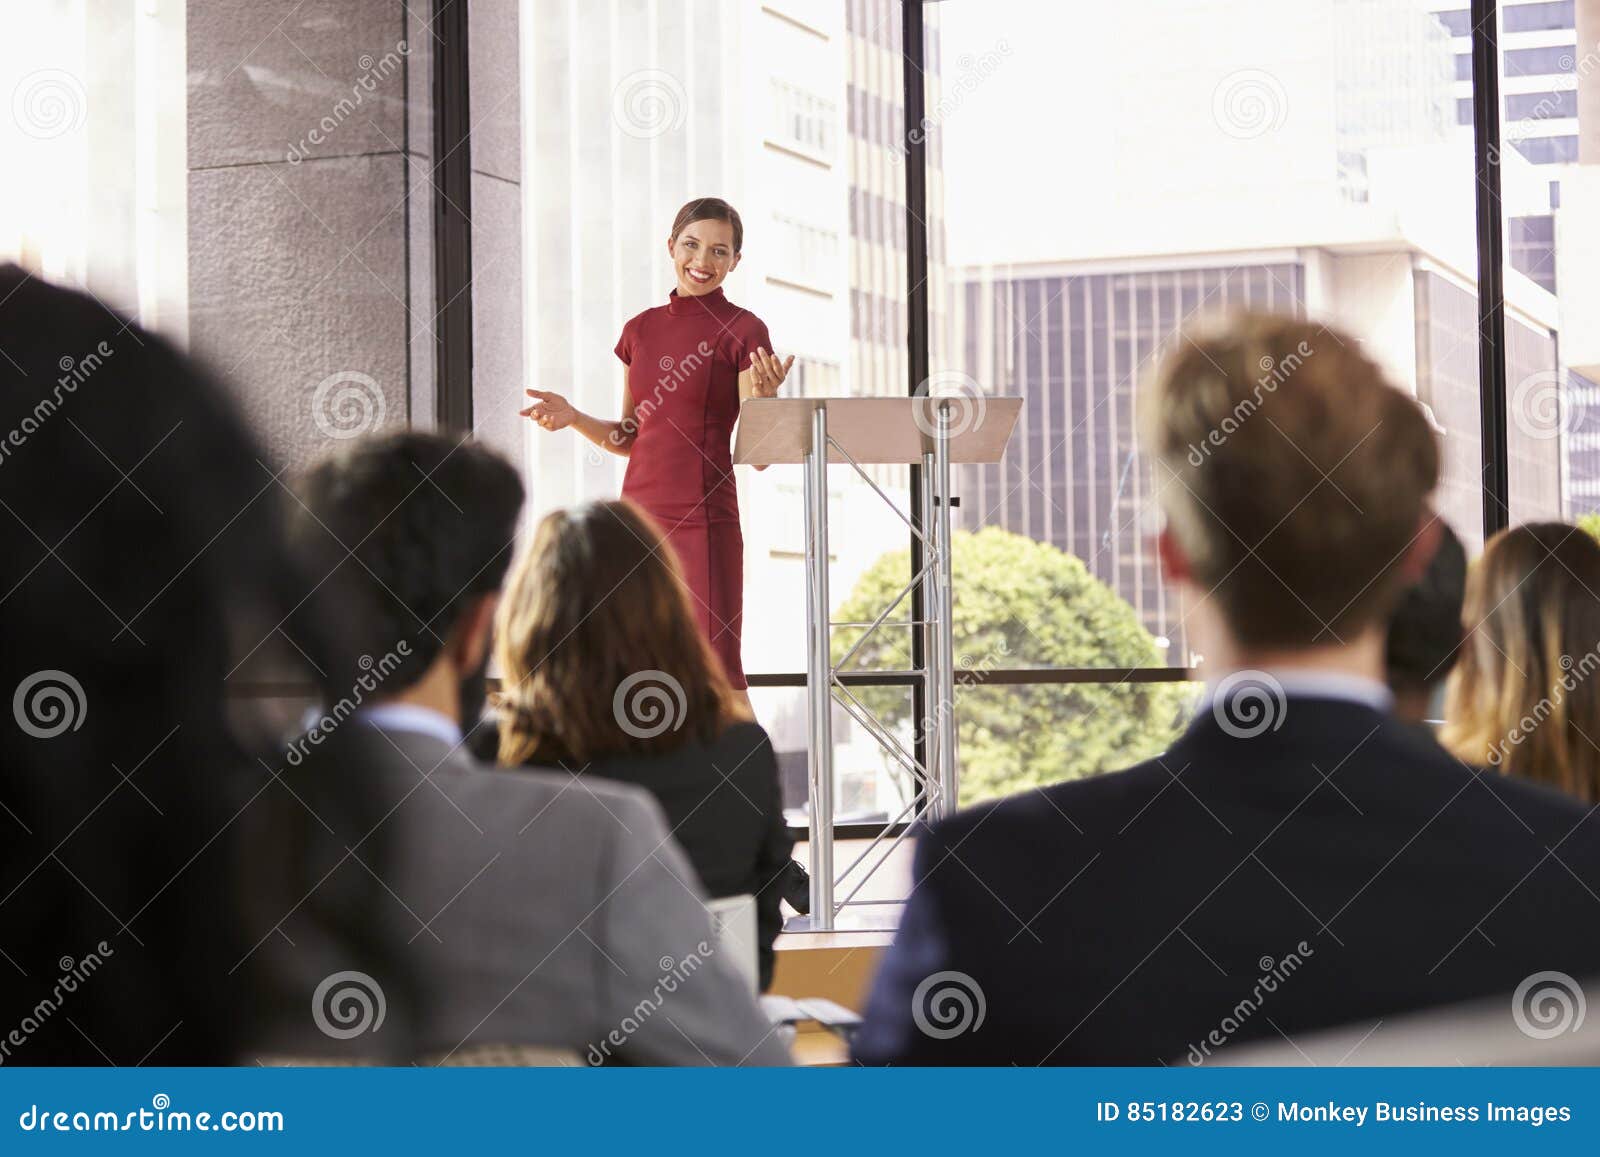 young woman presenting business seminar gestures to audience